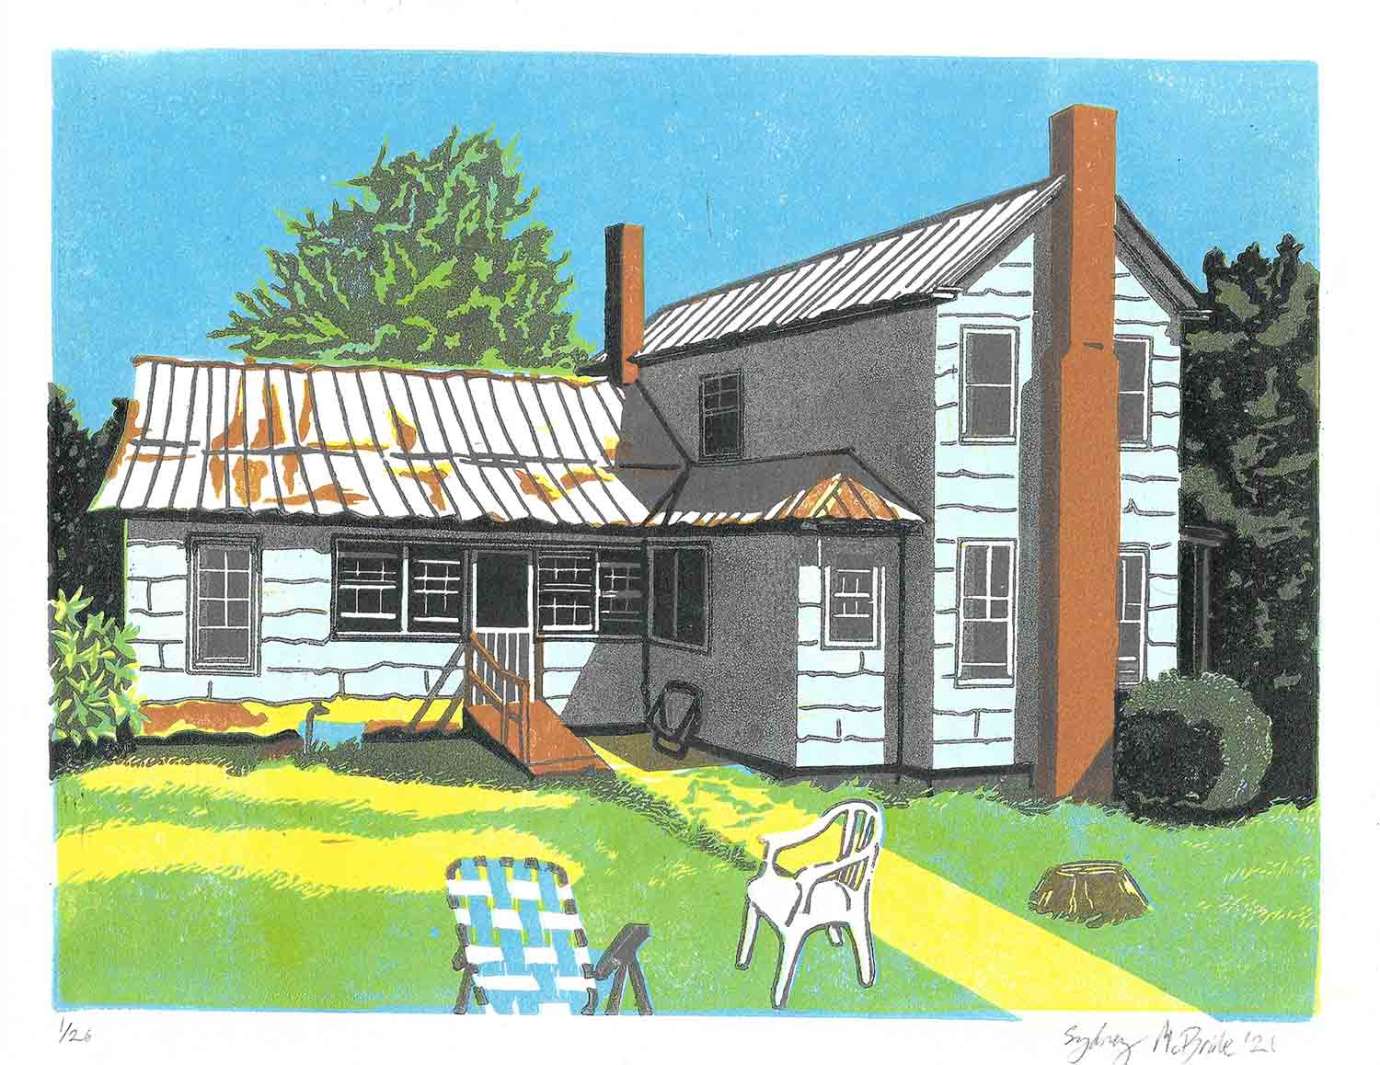 A print by Sydney McBride of a white farmhouse with a rusting metal roof set on a bright green lawn